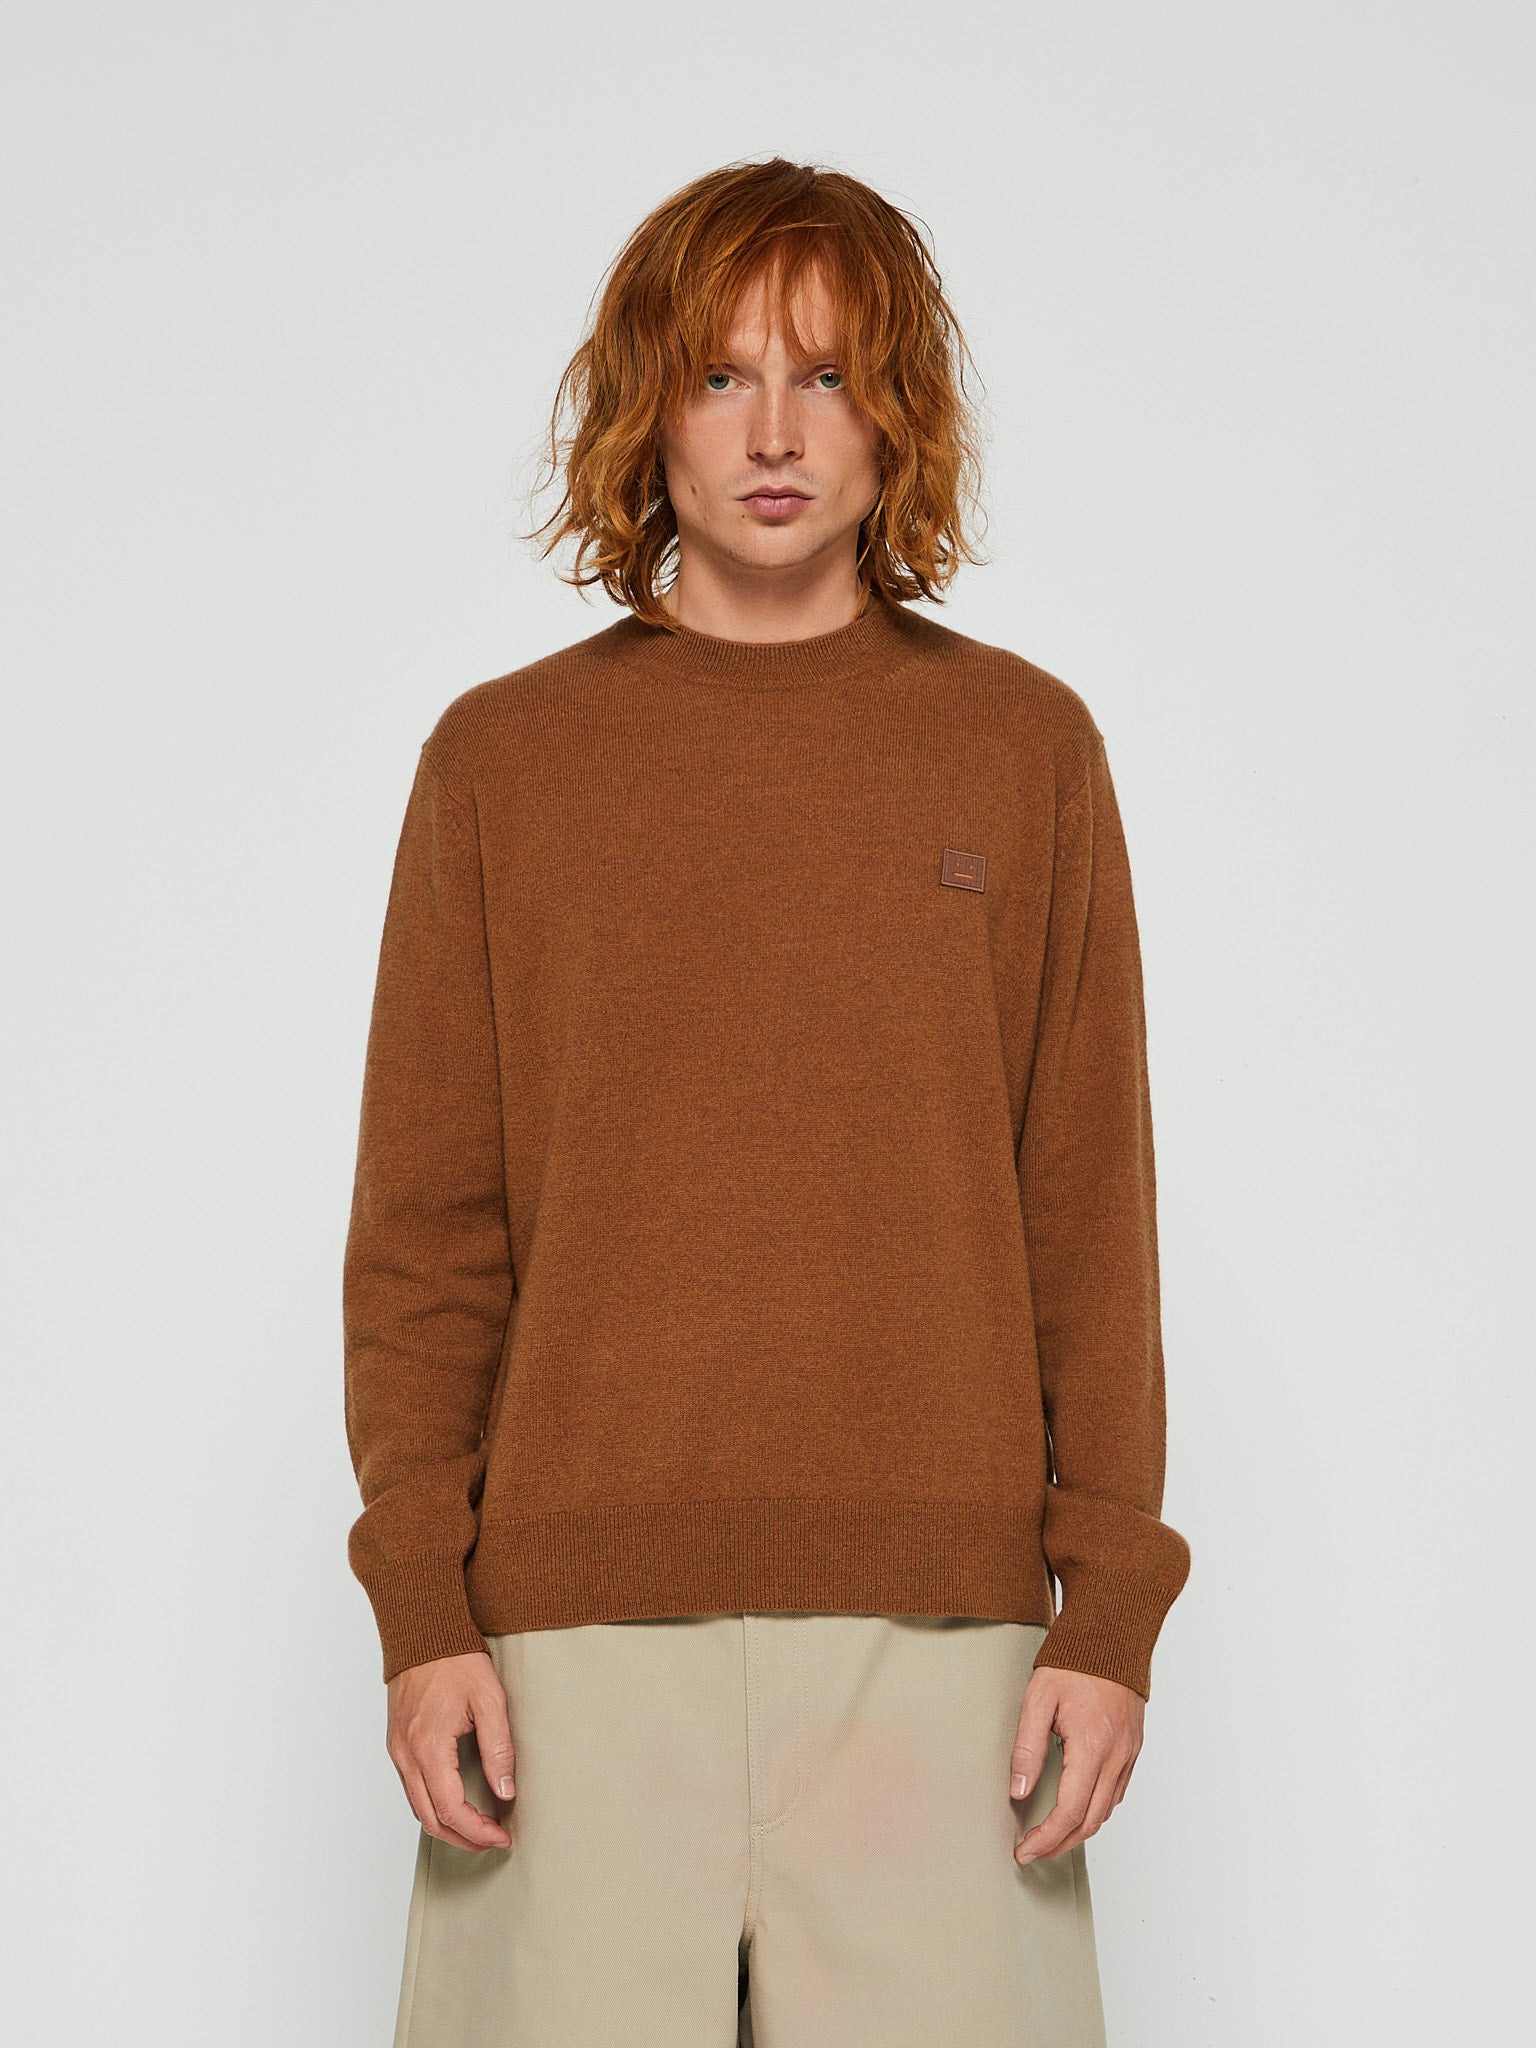 Acne Studios - Crew Neck Sweater in Toffee Brown